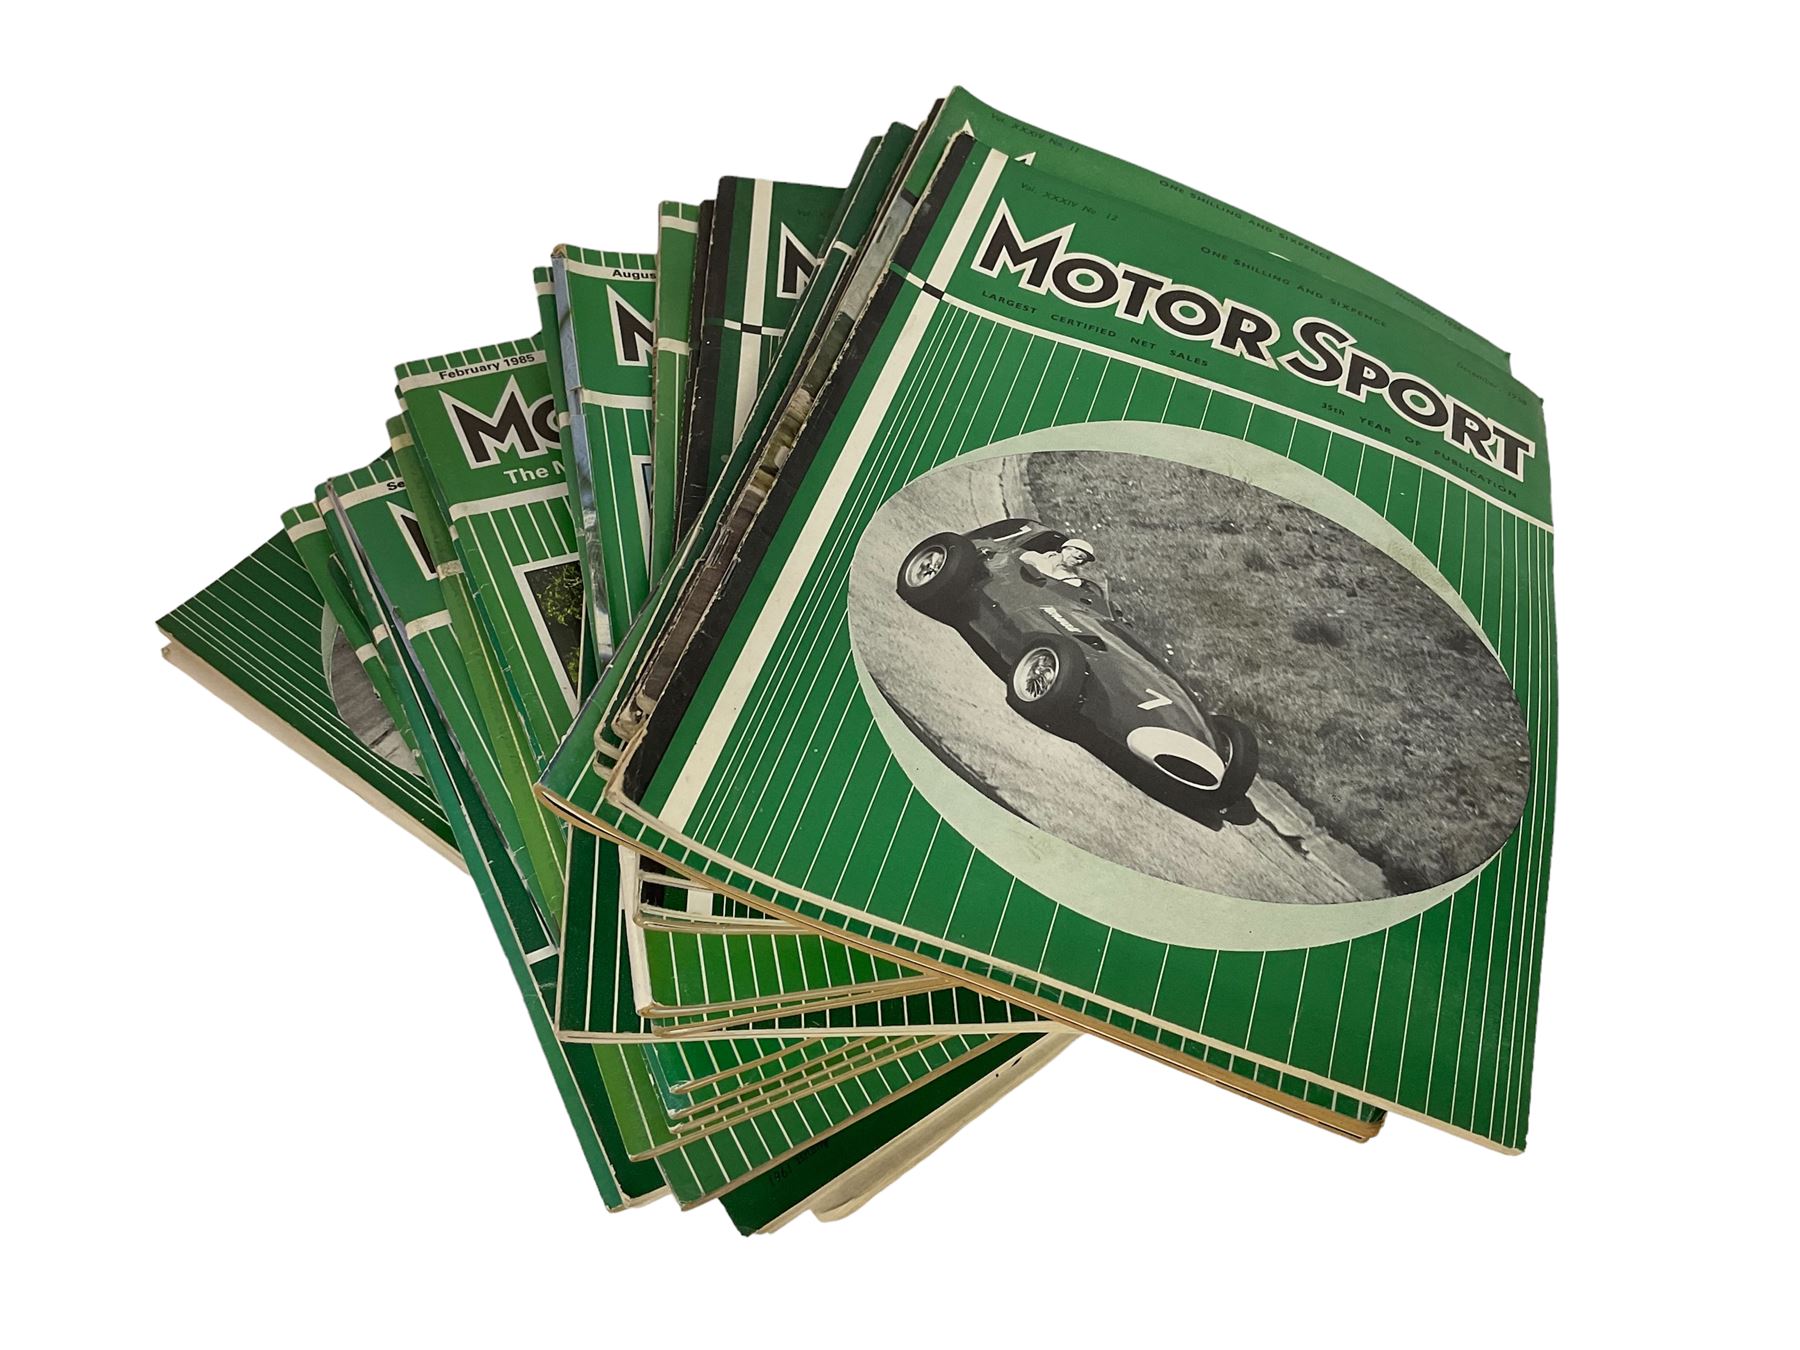 Large collection of Motorsport magazines